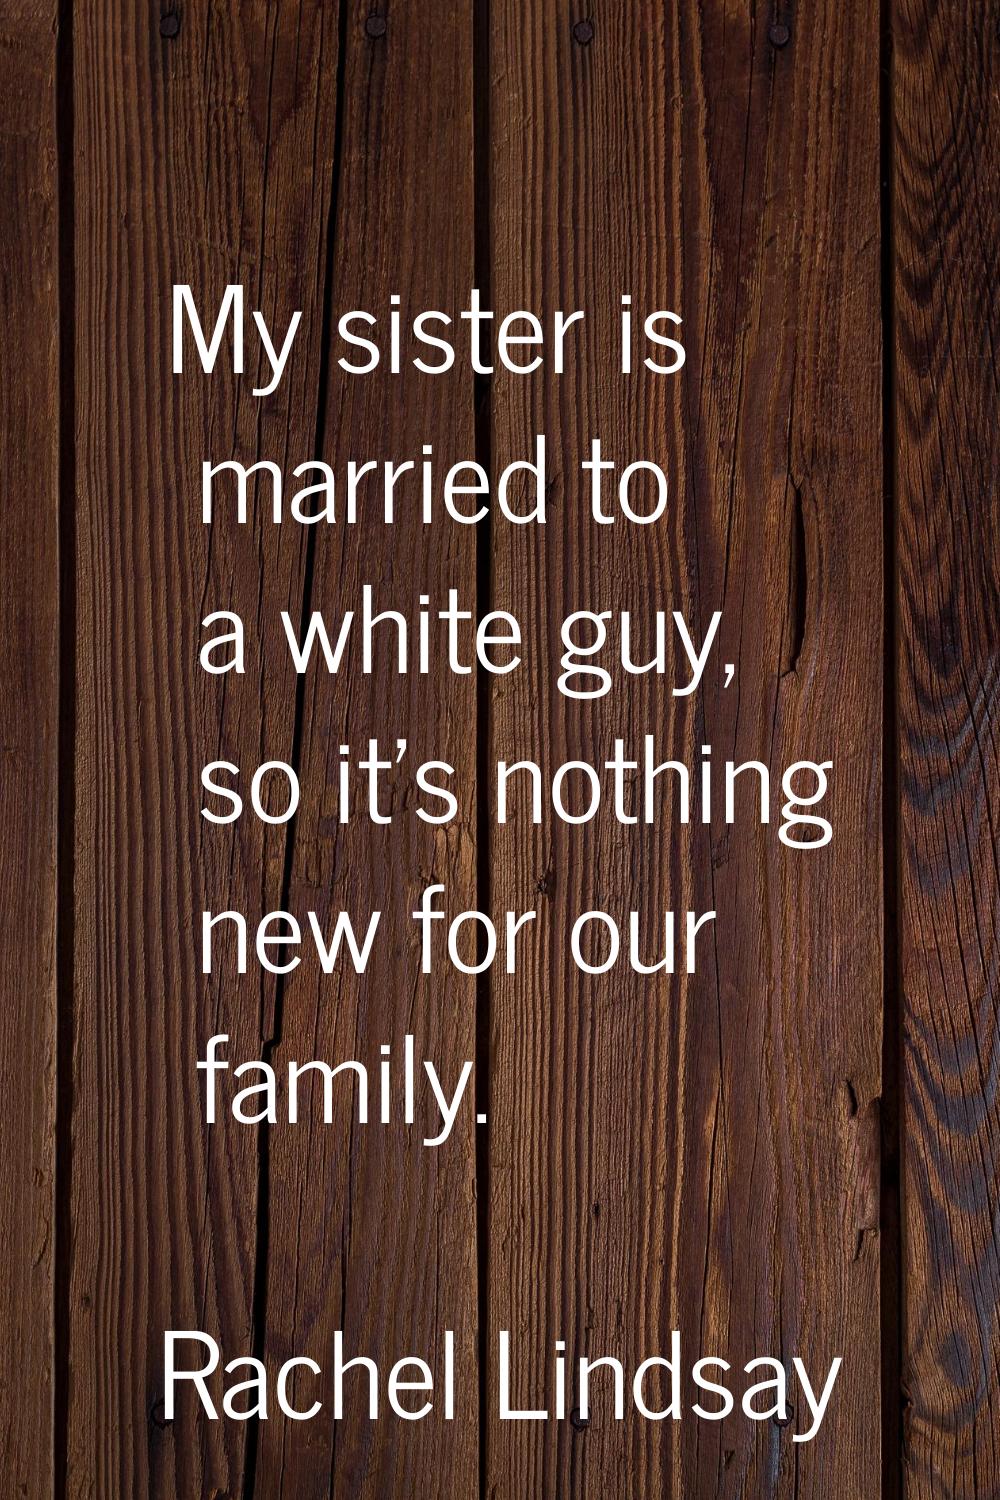 My sister is married to a white guy, so it's nothing new for our family.